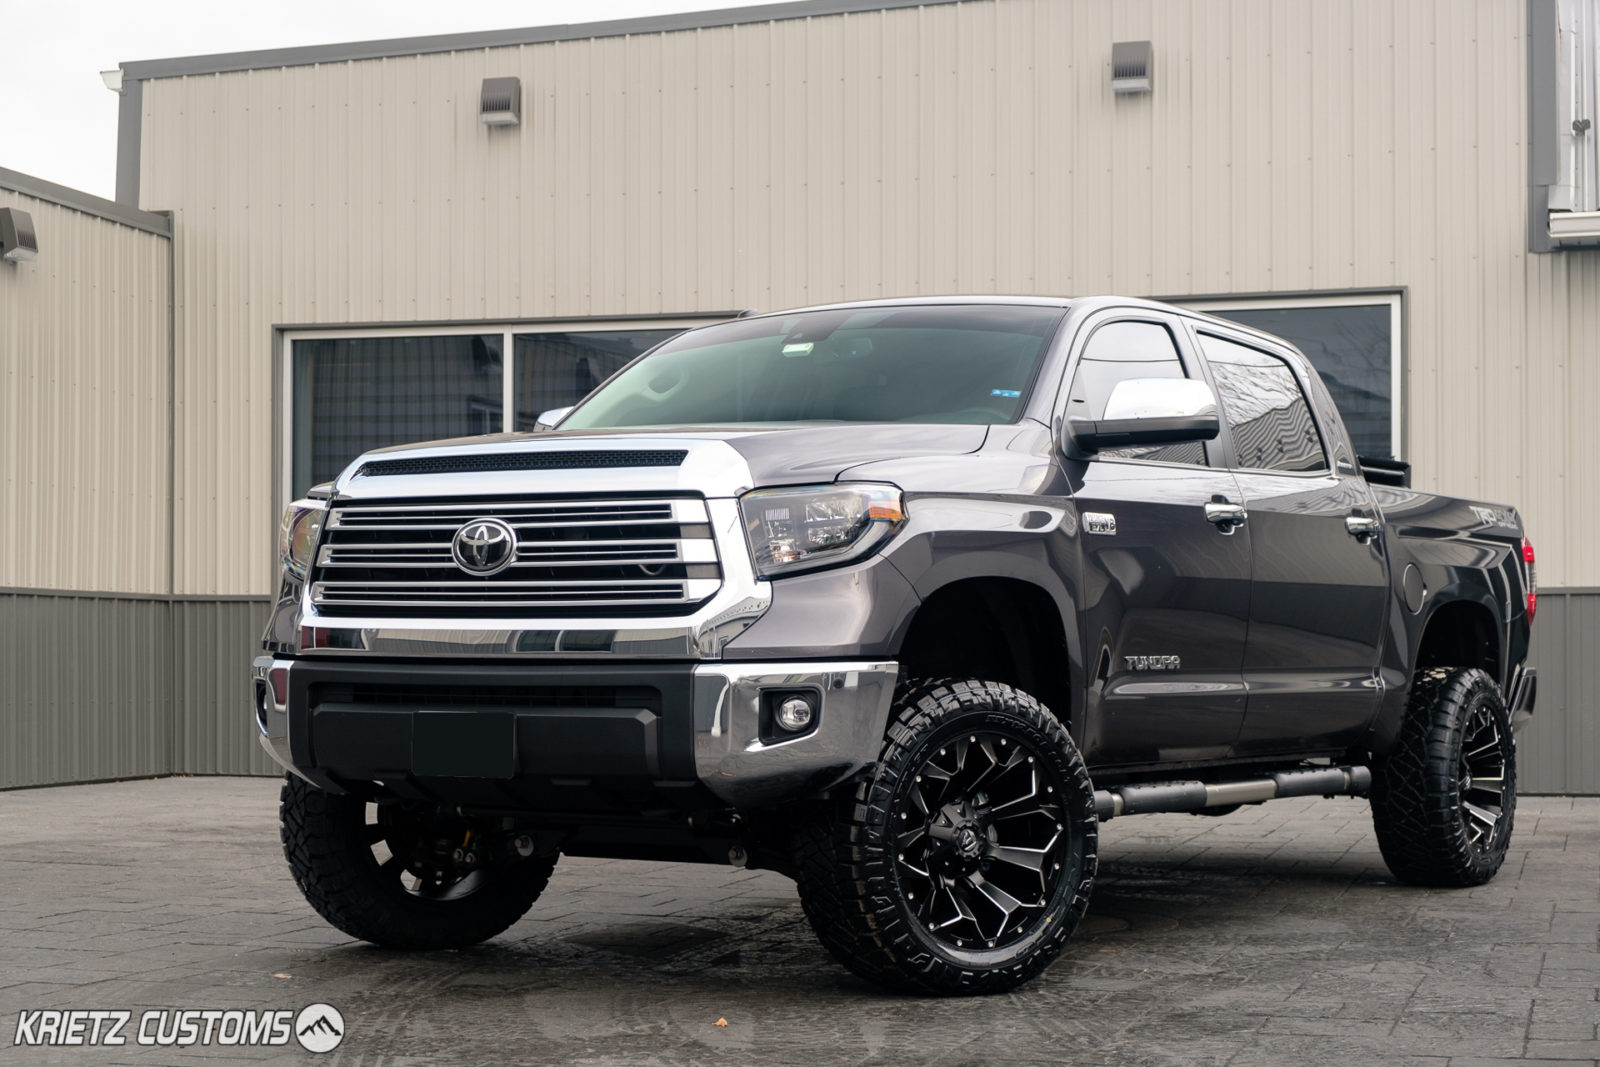 On YouTube, there is a video showcasing a 2020 Toyota Tundra equipped with 20-inch Fuel Vapor wheels in a DDS finish.